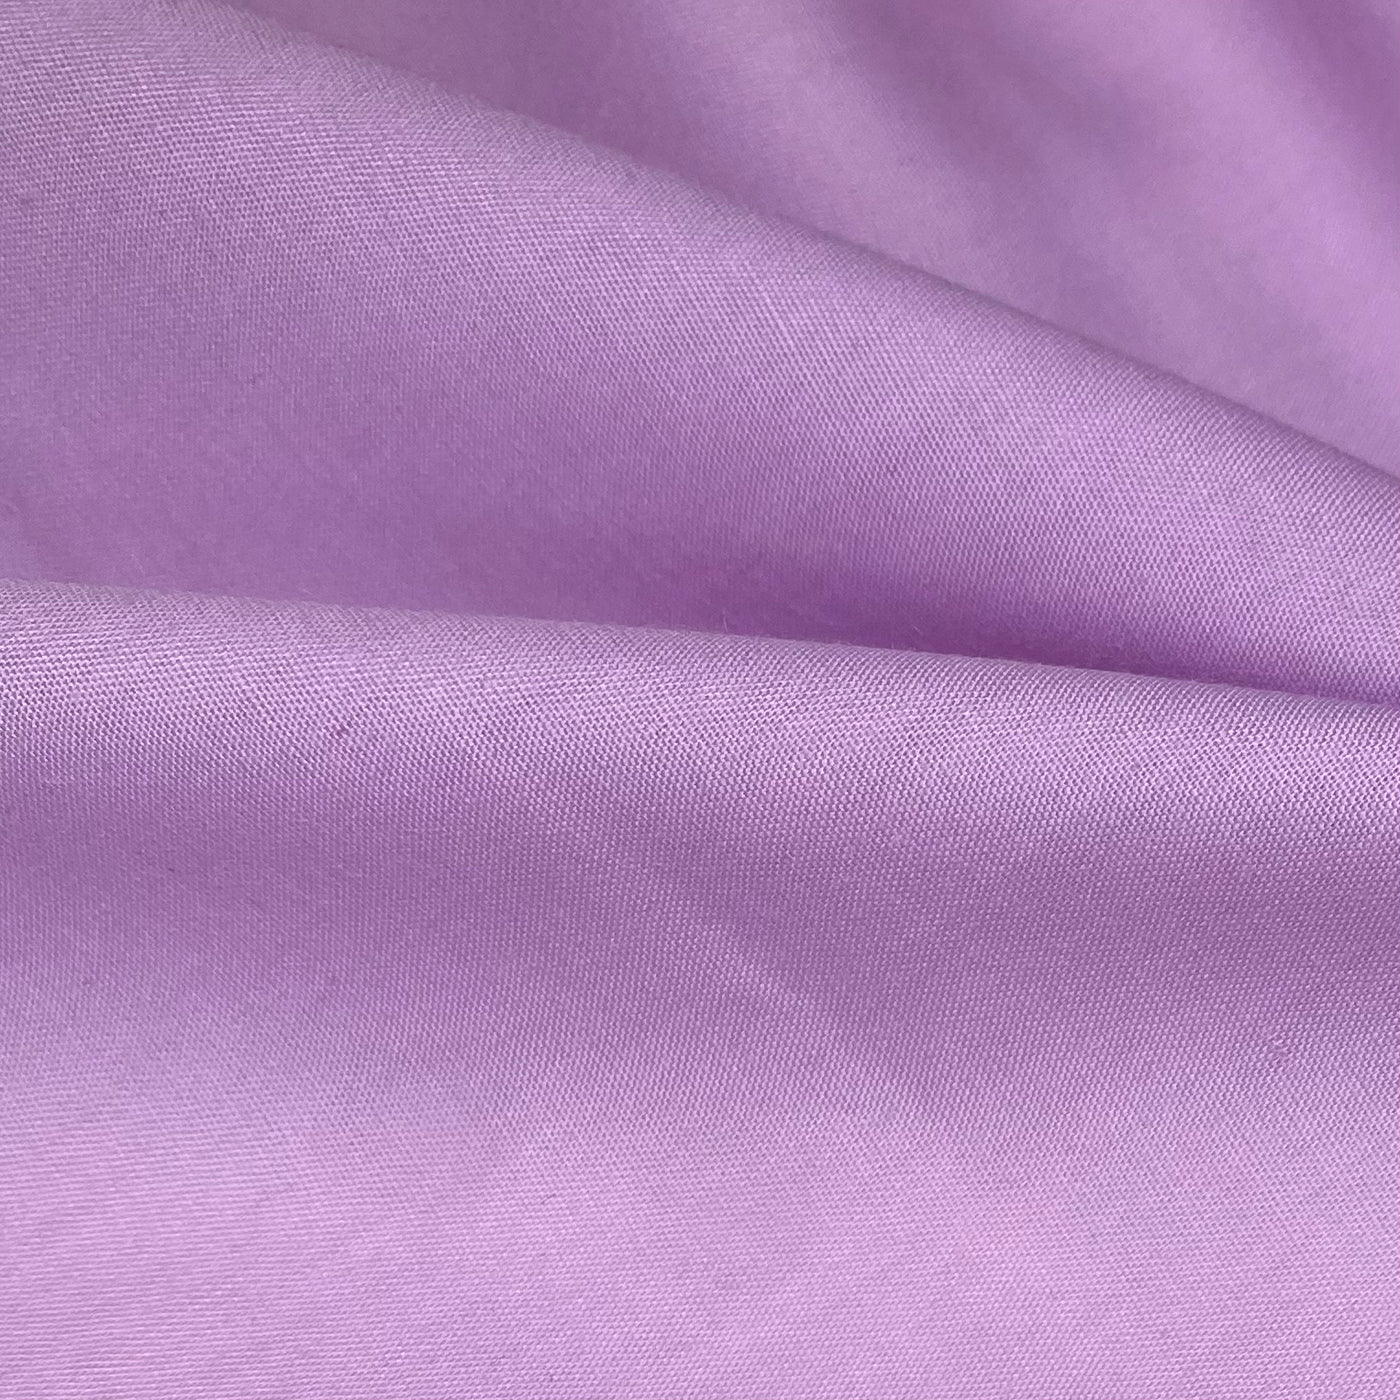 Poly/Cotton Broadcloth - 44” - Lilac